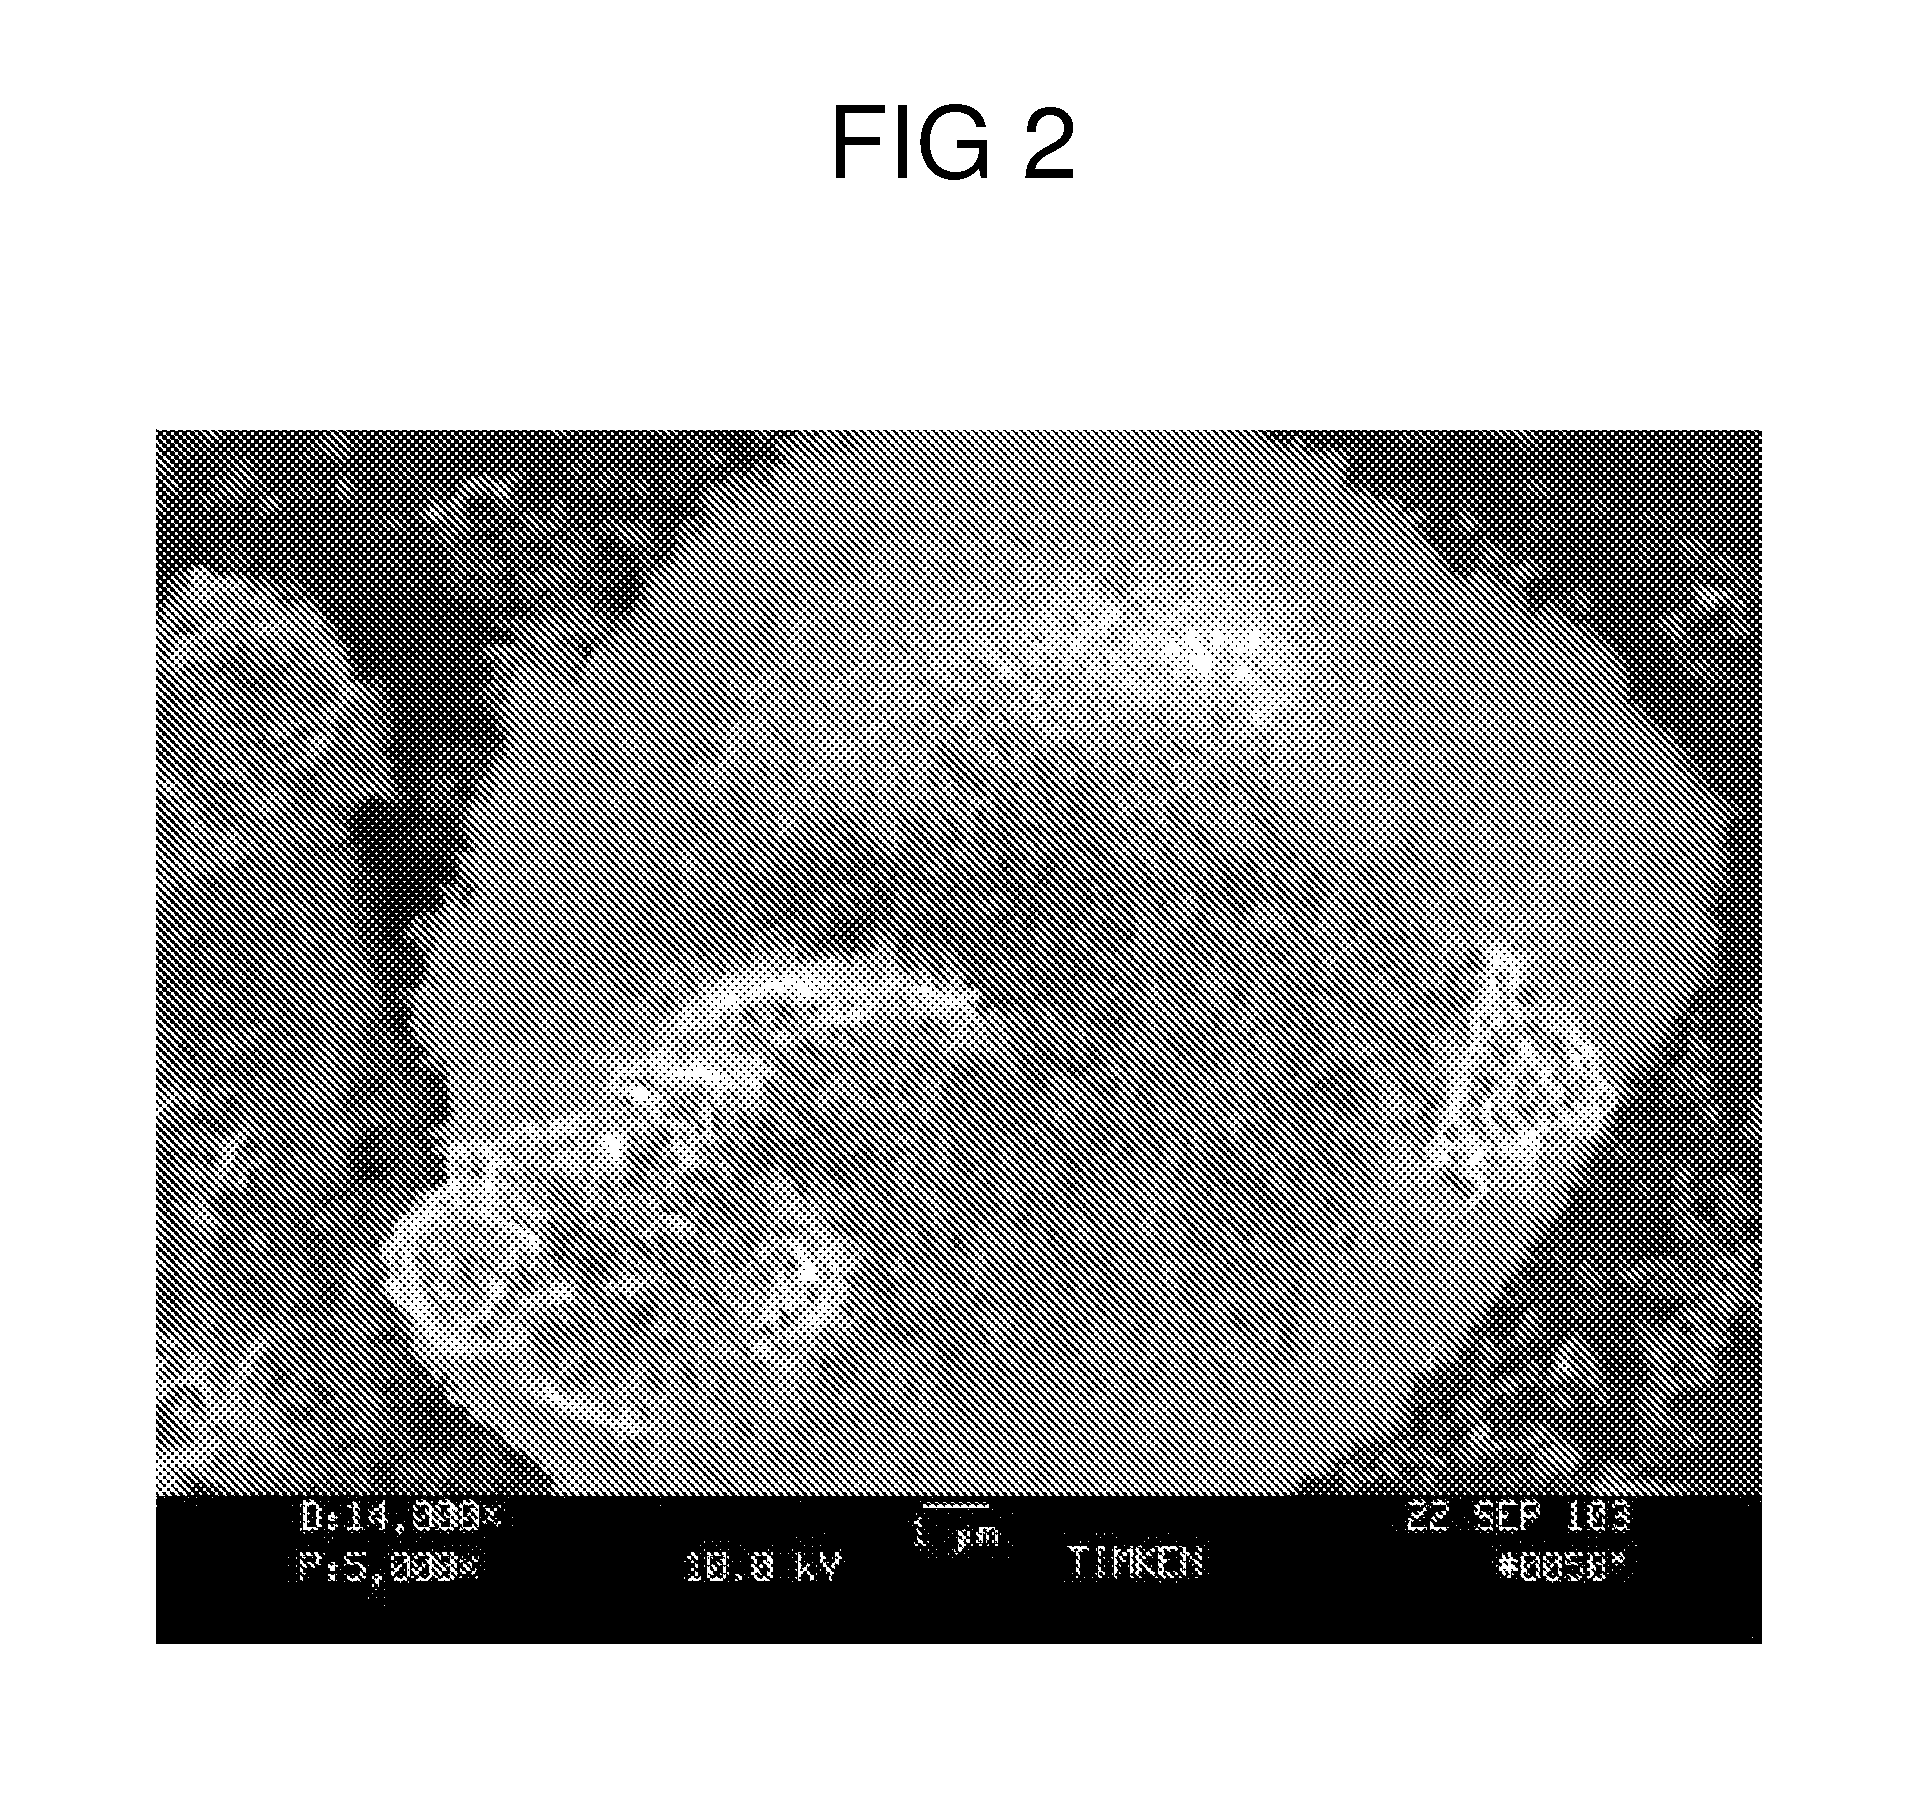 Method of producing uniform blends of nano and micron powders